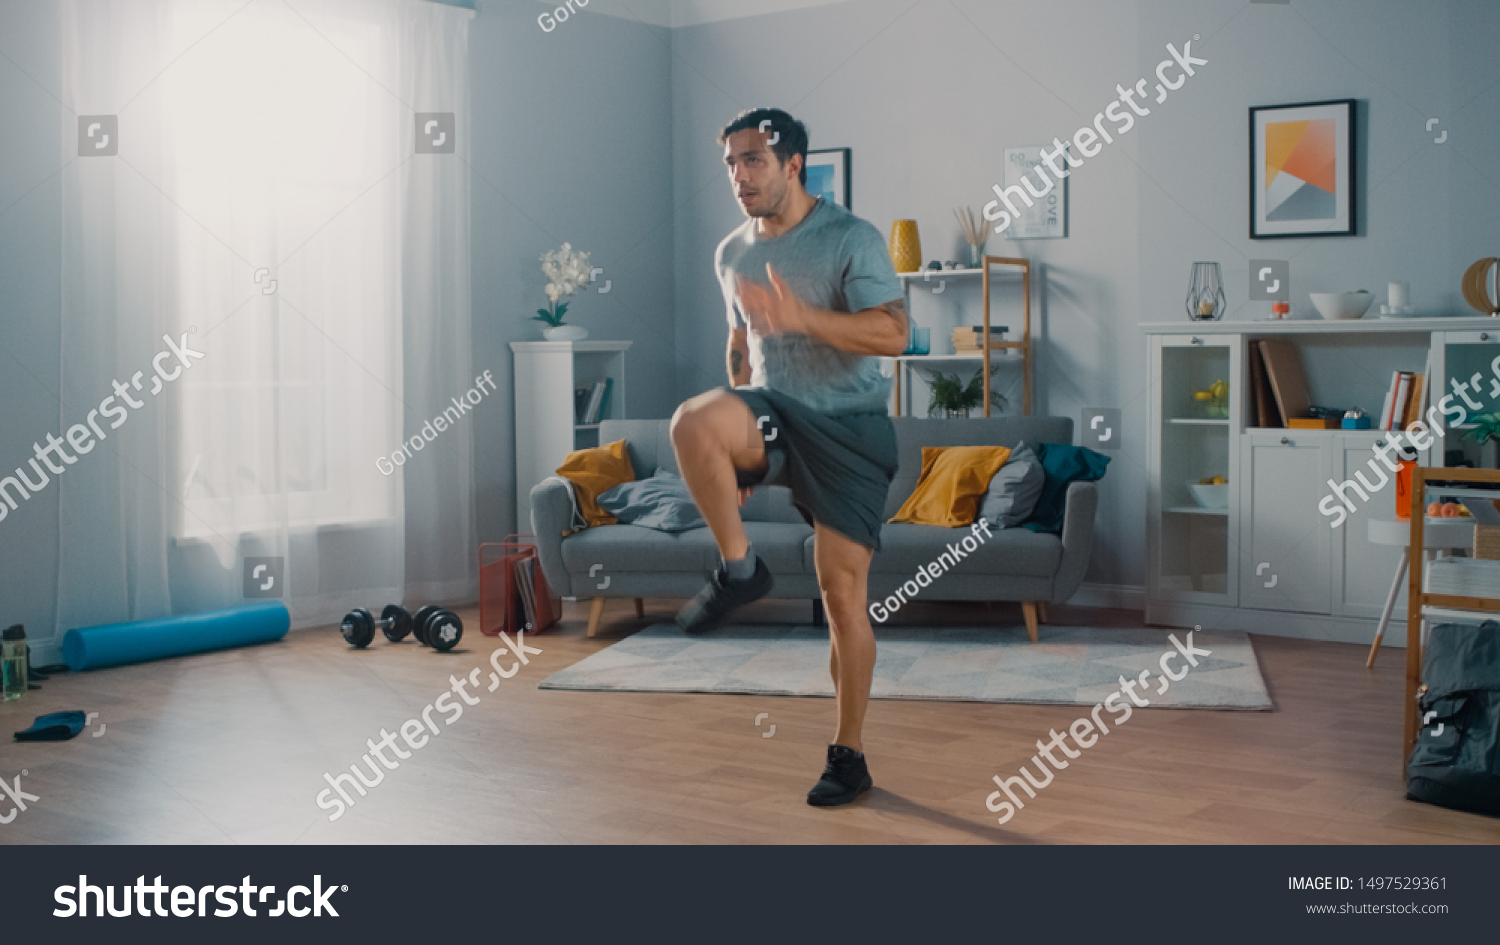 Strong Athletic Fit Man in T-shirt and Shorts is Energetically Jogging in Place at Home in His Spacious and Bright Living Room with Minimalistic Interior. #1497529361